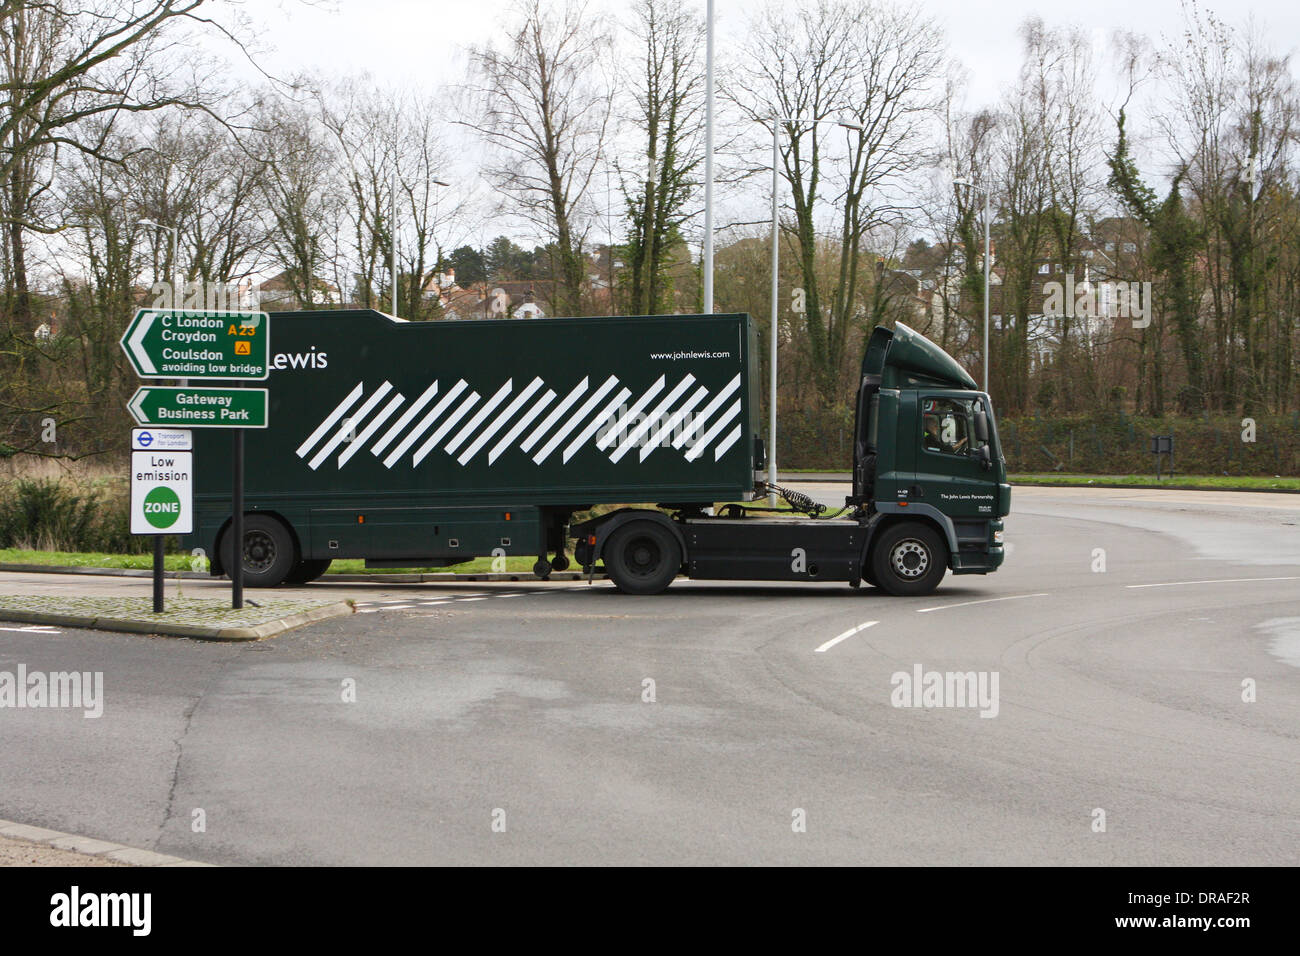 An articulated John Lewis truck entering a roundabout in Coulsdon, Surrey, England Stock Photo